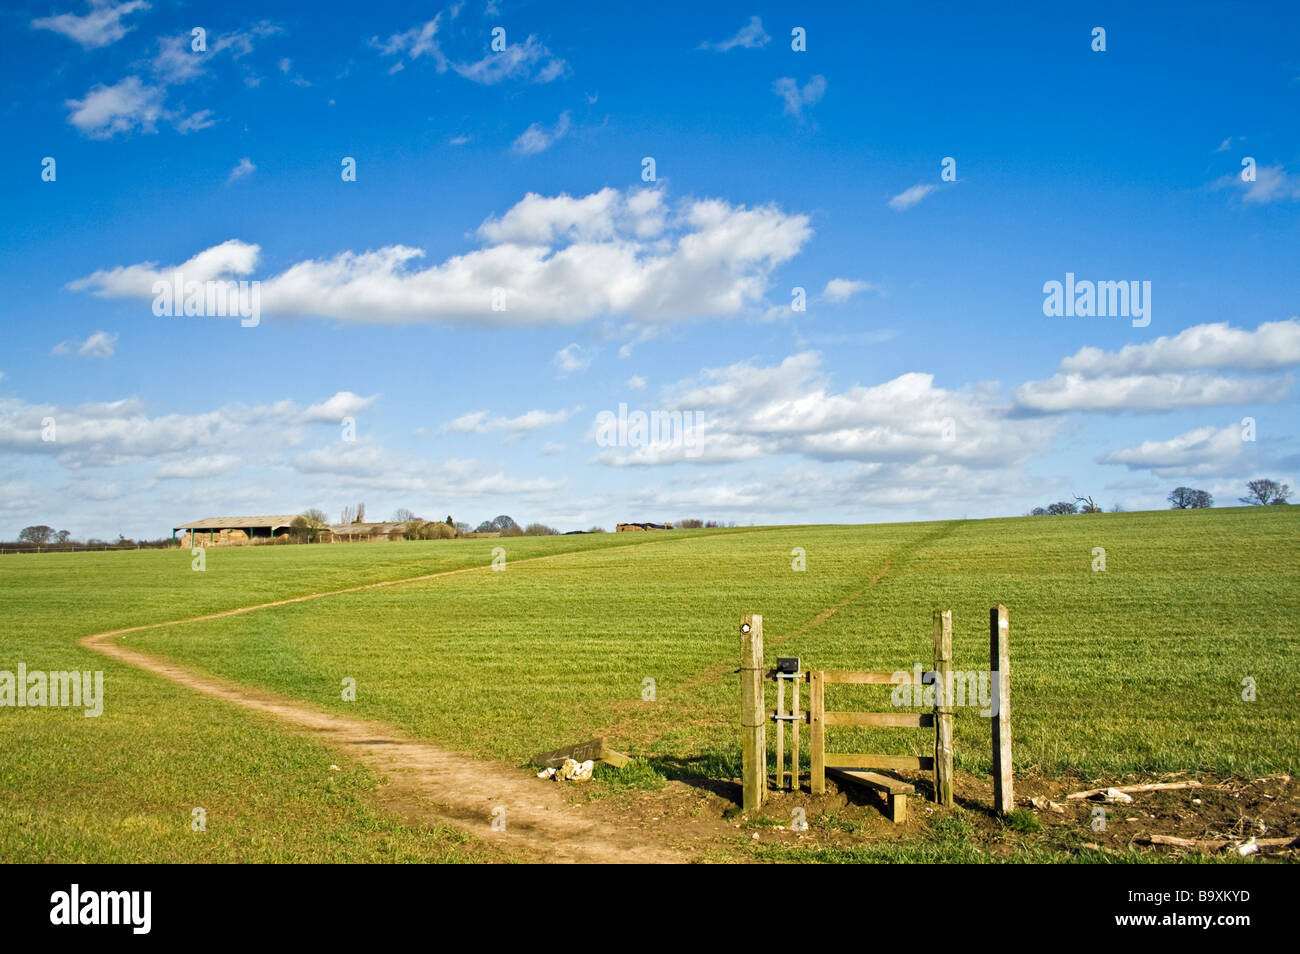 A country stile with no fence. A handwritten sign directing walkers along the correct footpath route.  Currently under threat of development. Stock Photo